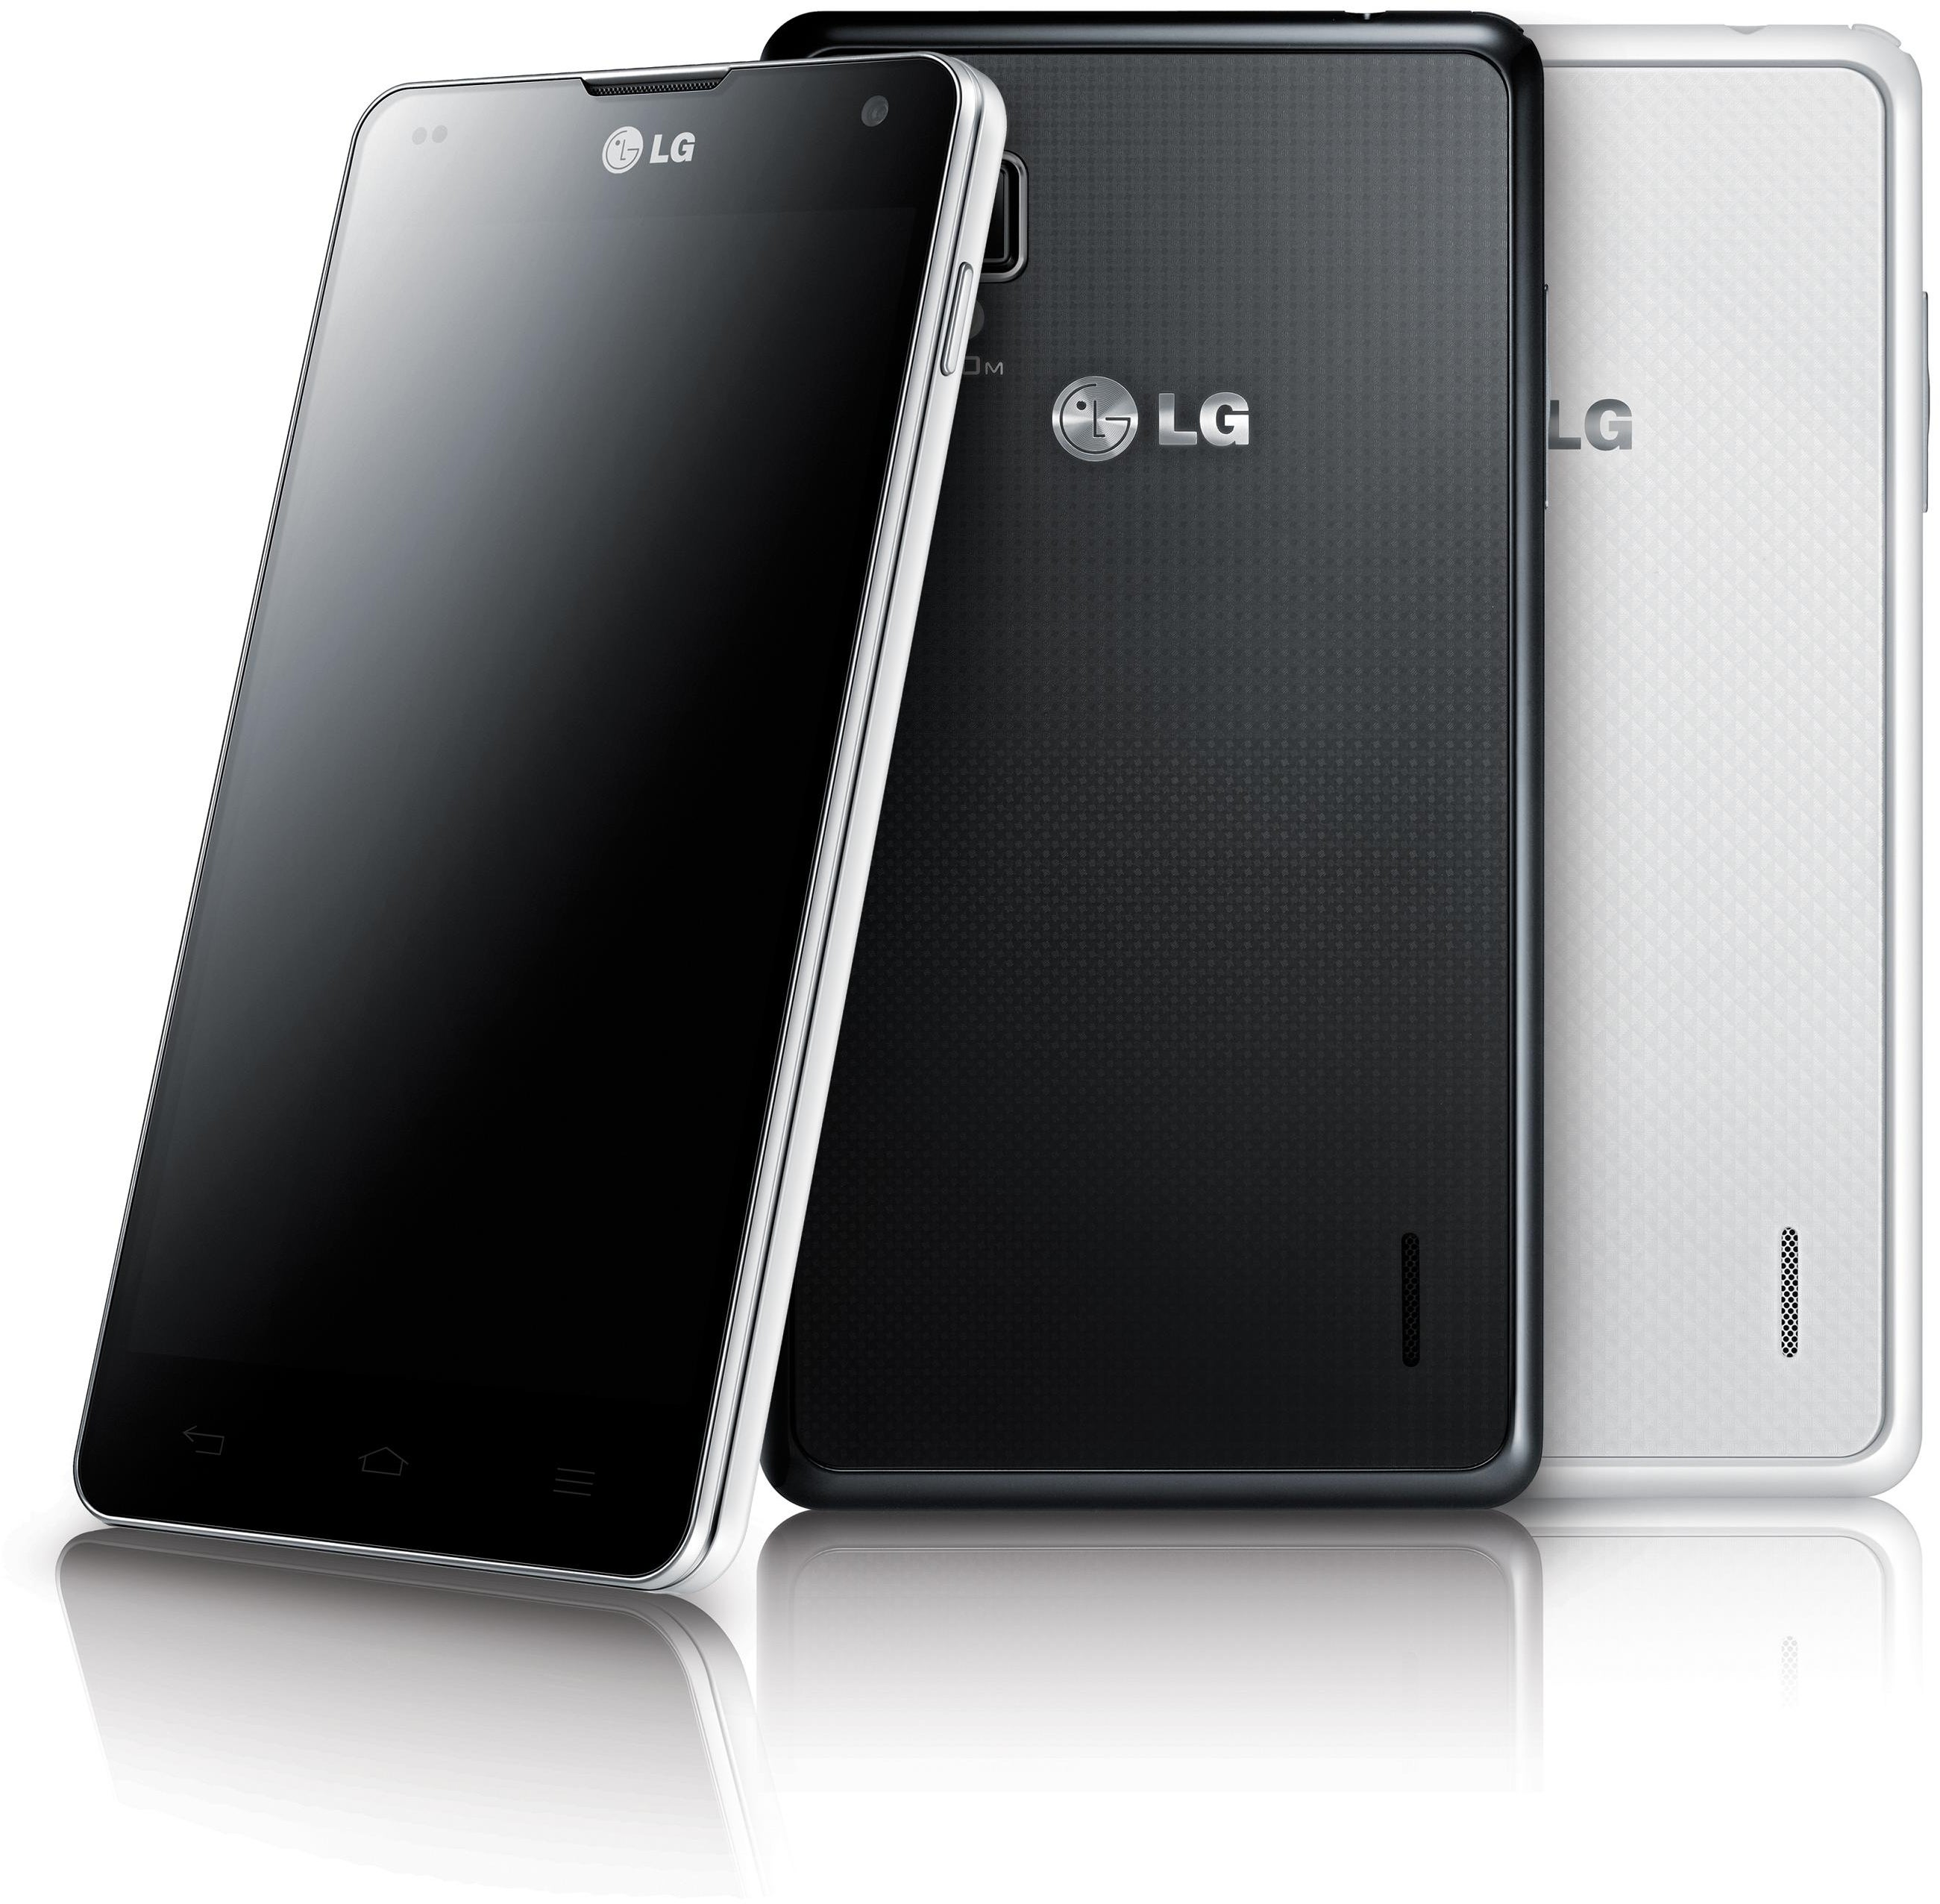 Optimus G for Korea with 'polarized glass' back" &nbsp - Did LG just pull a Samsung? LG Optimus G specs review and comparison vs Samsung Galaxy S III vs HTC One X